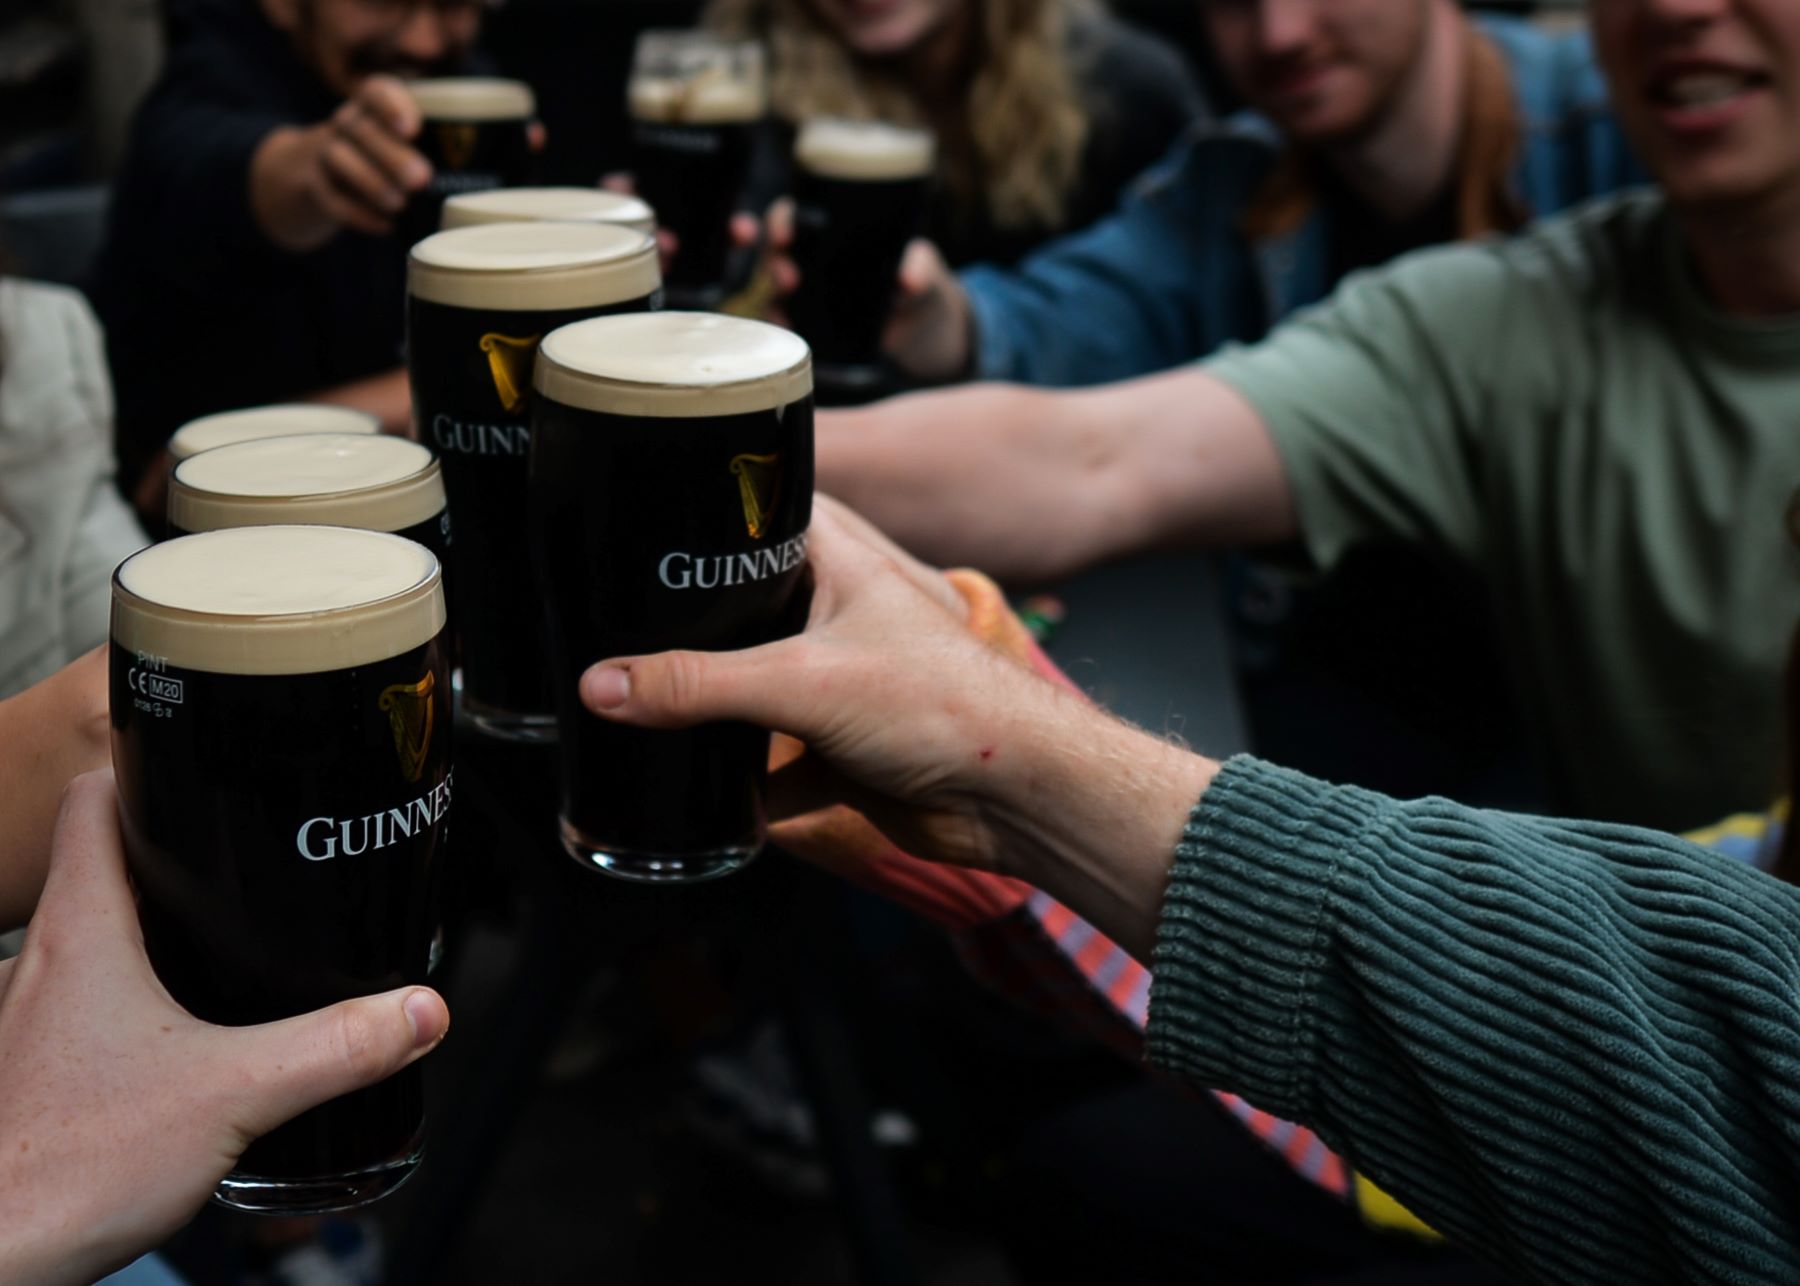 A group of friends drinking Guinness beer in a pub in Dublin, Ireland